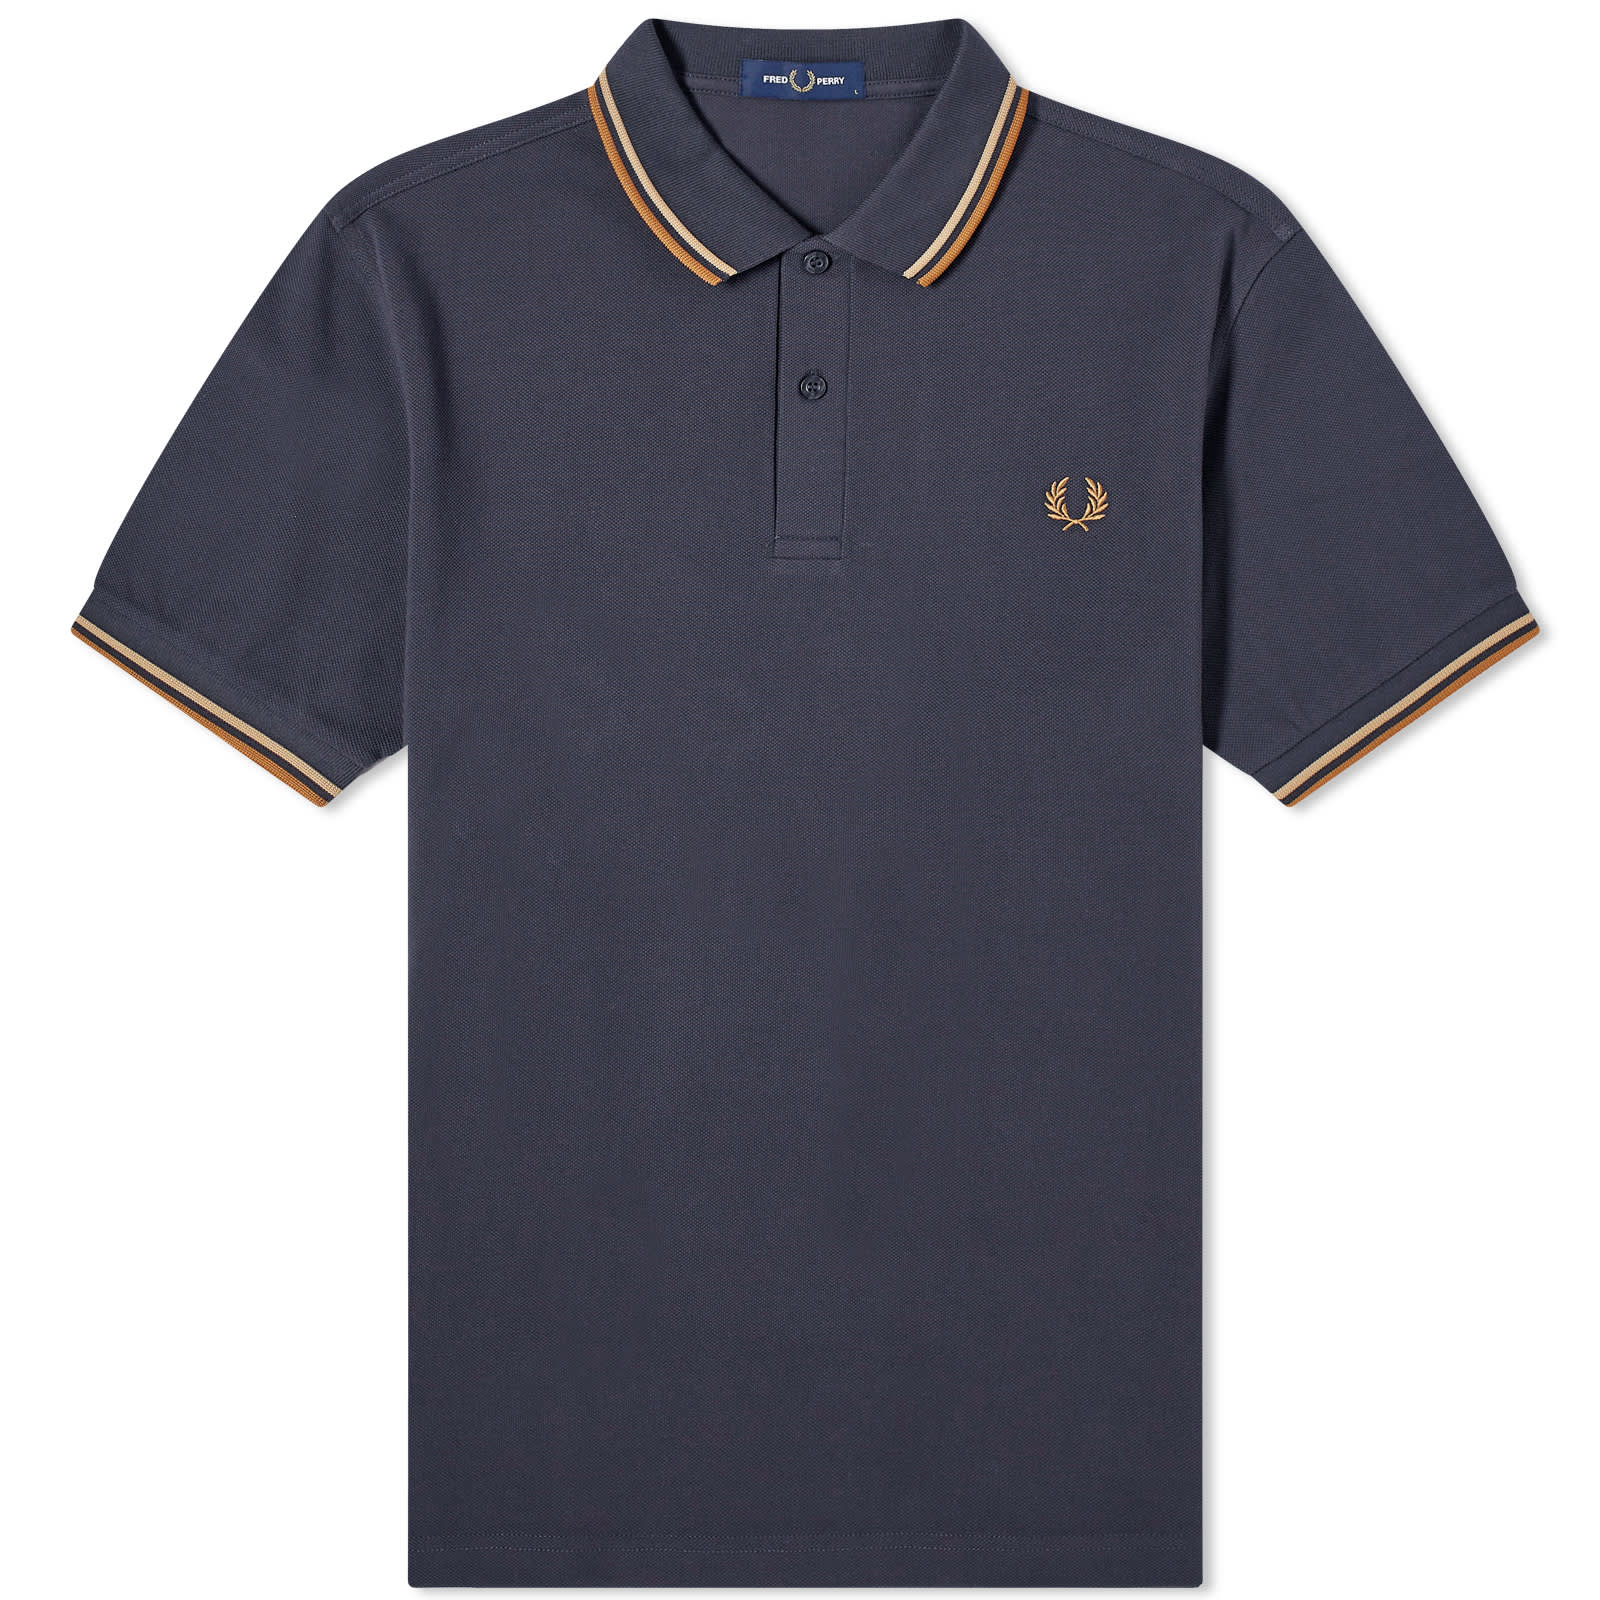 Поло Fred Perry Twin Tipped, цвет Grey, Stone & Caramel поло fred perry twin tipped цвет snow oat